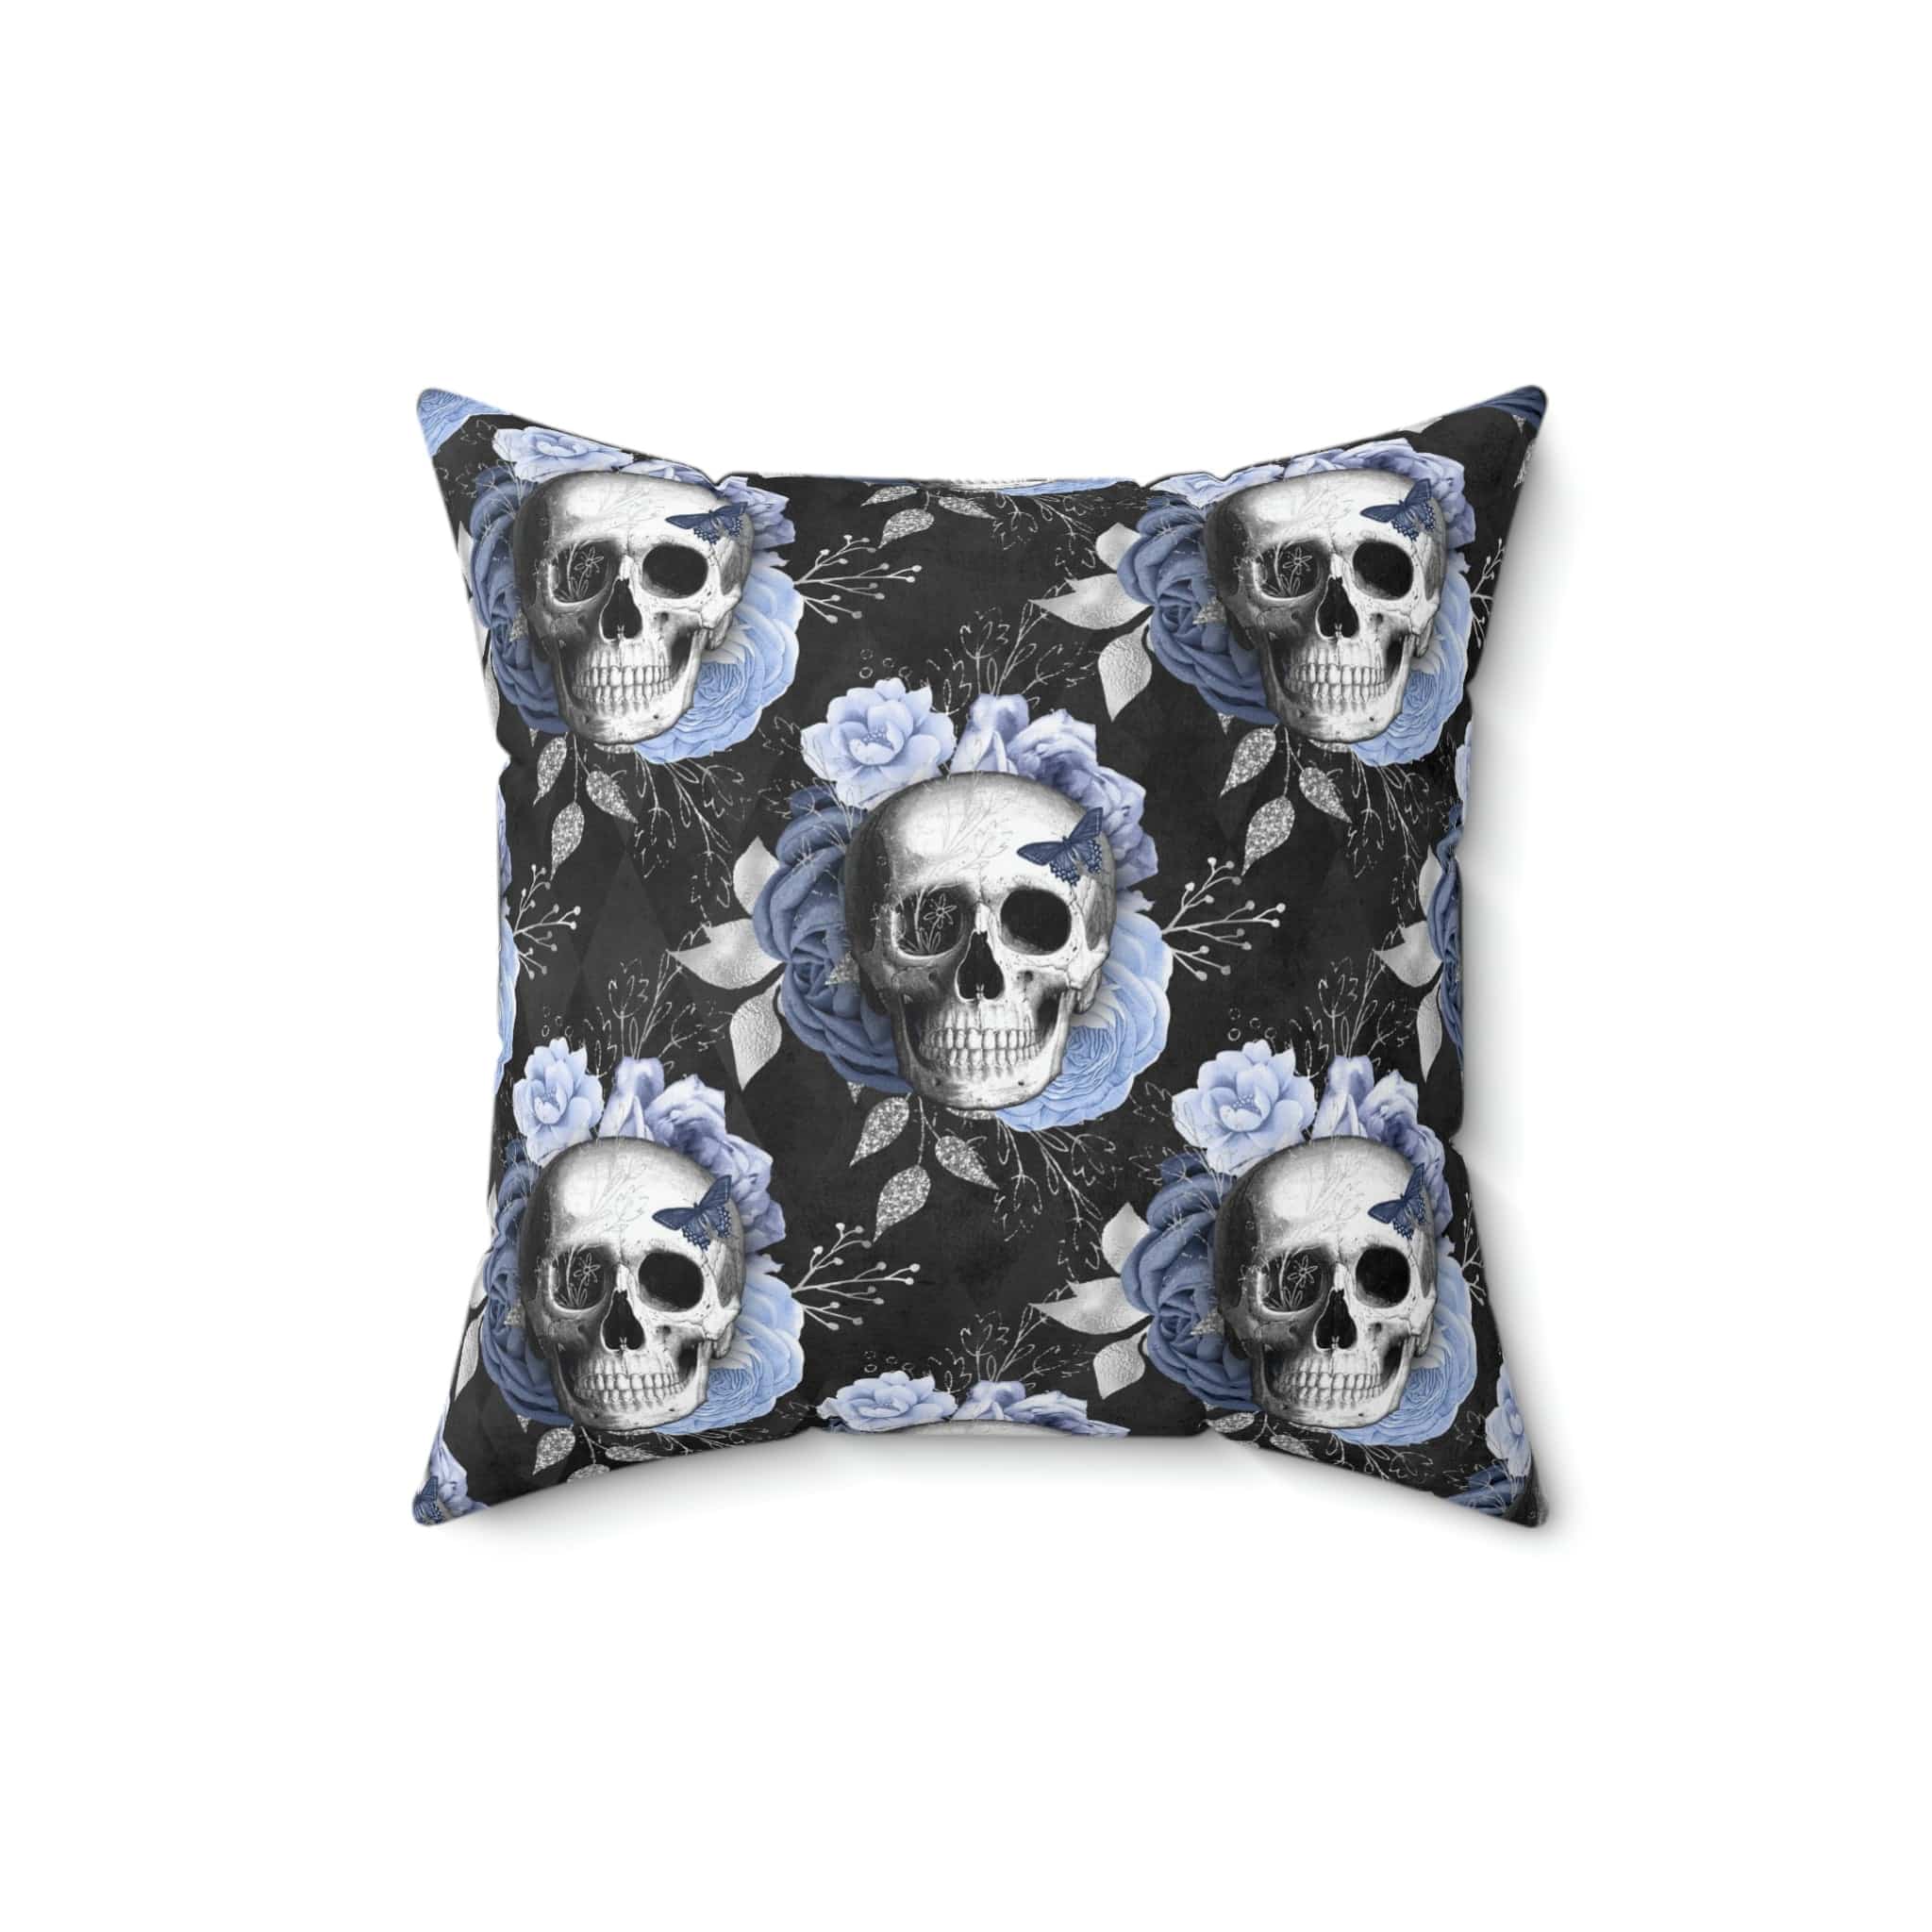 Kate McEnroe New York Floral Skull Square Pillow Cover Throw Pillow Covers 16&quot; × 16&quot; 3549442685